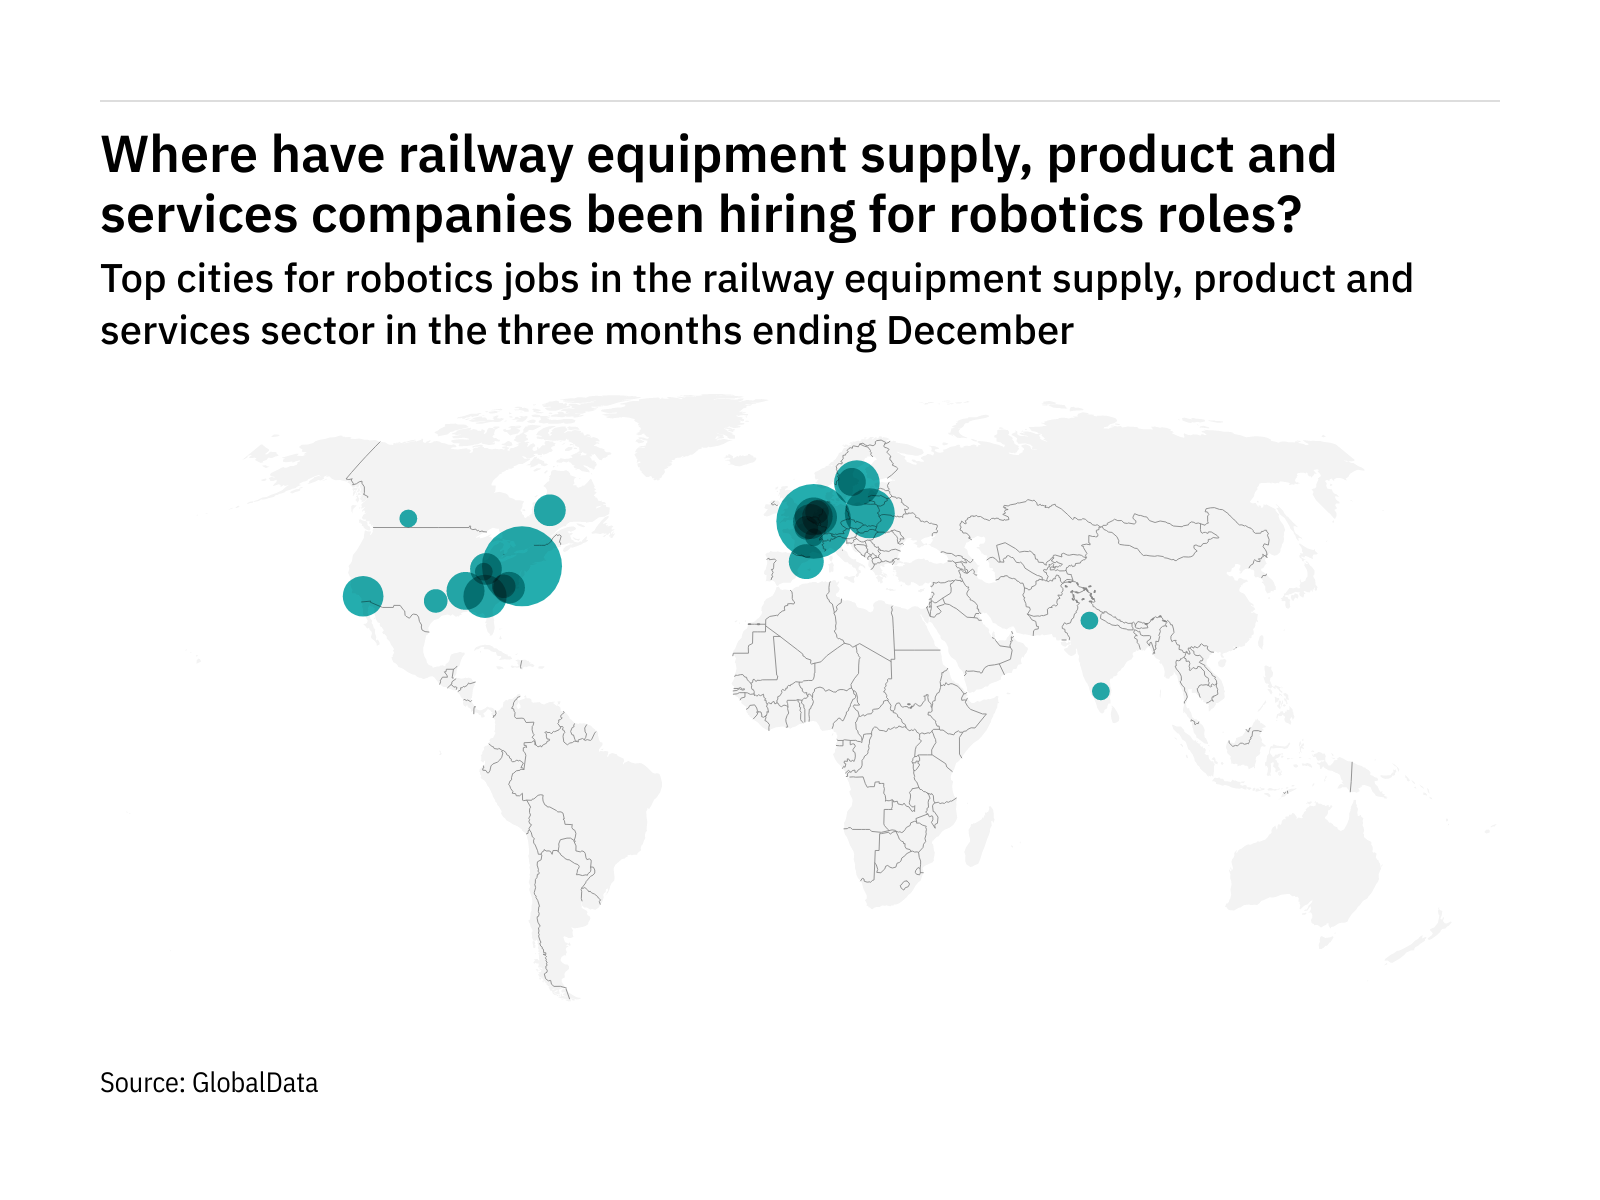 is seeing a hiring industry robotics roles - Railway Technology